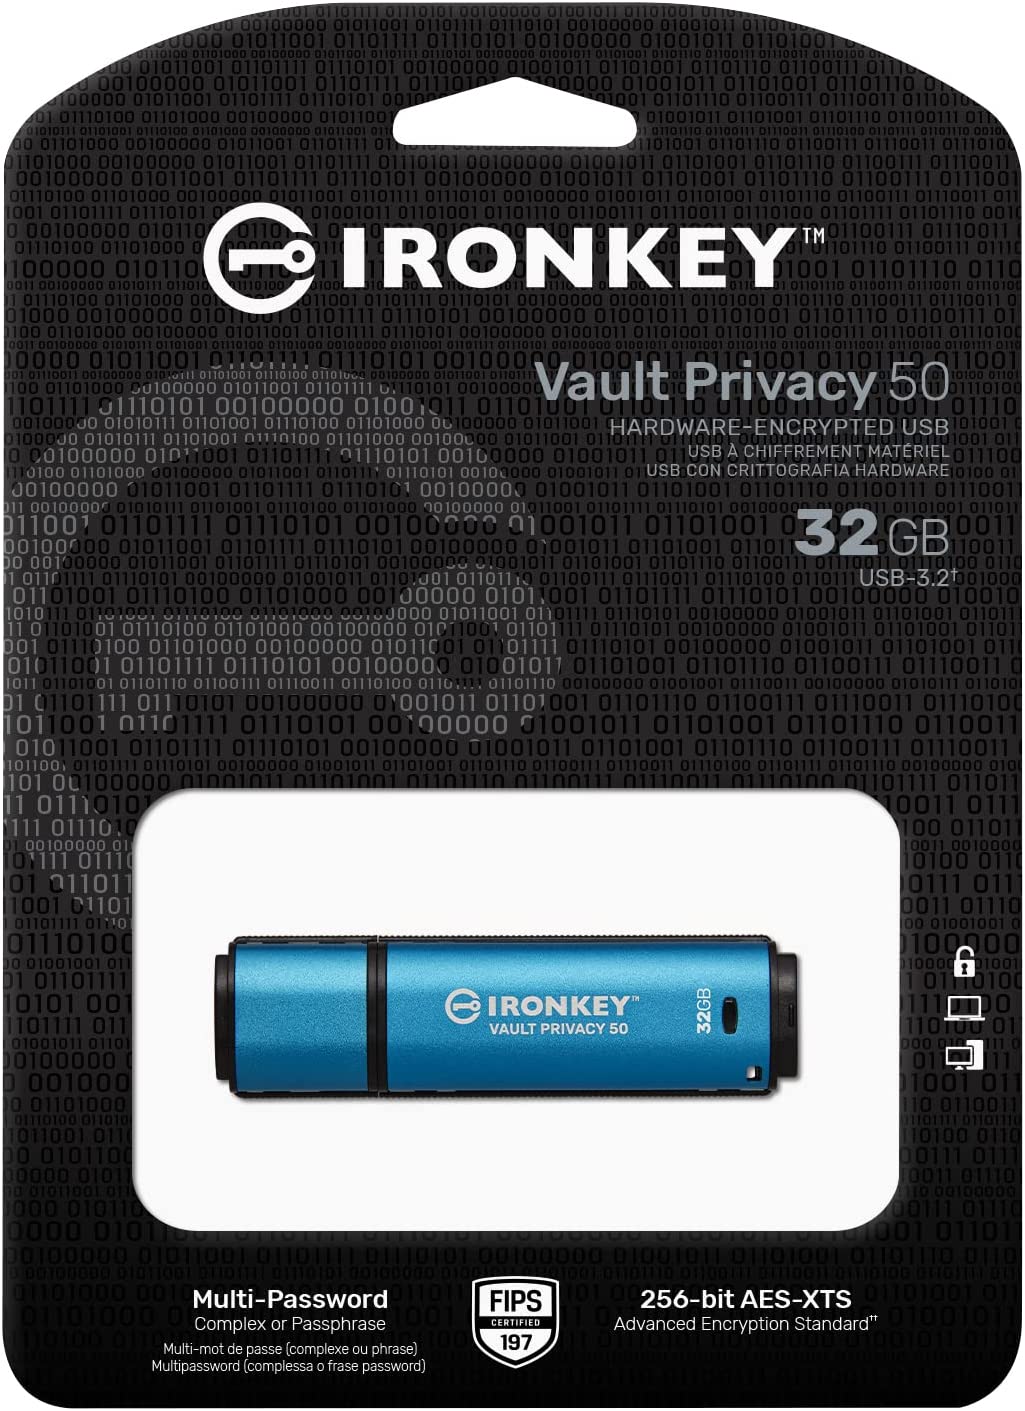 Kingston IronKey Vault Privacy 50 32GB Encrypted USB | FIPS 197 | AES-256bit | BadUSB Attack Protection | Multi-Password Options | IKVP50/32GB